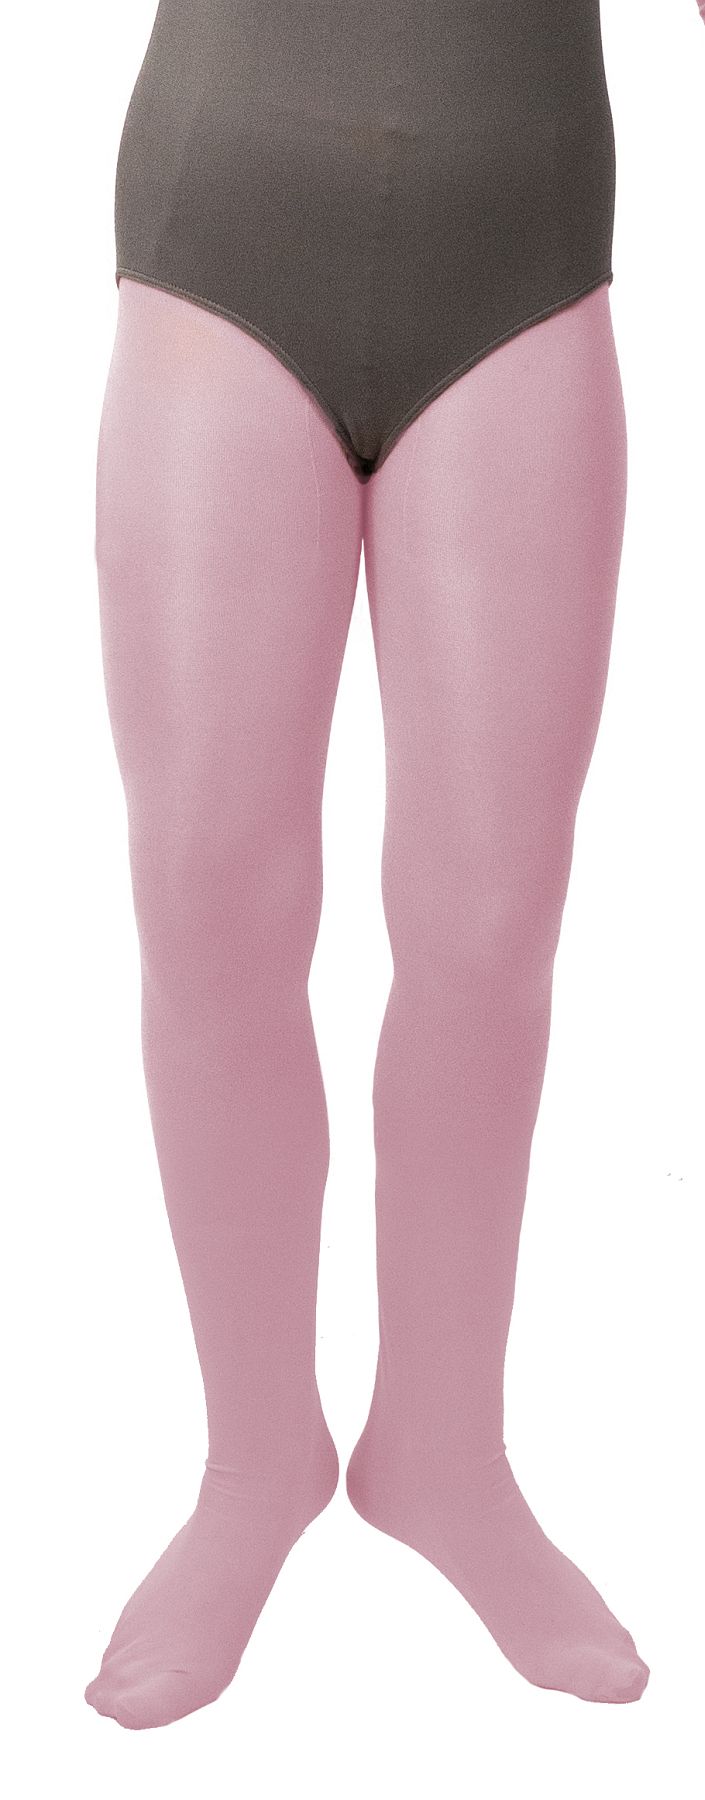 Opaque tights, pale pink